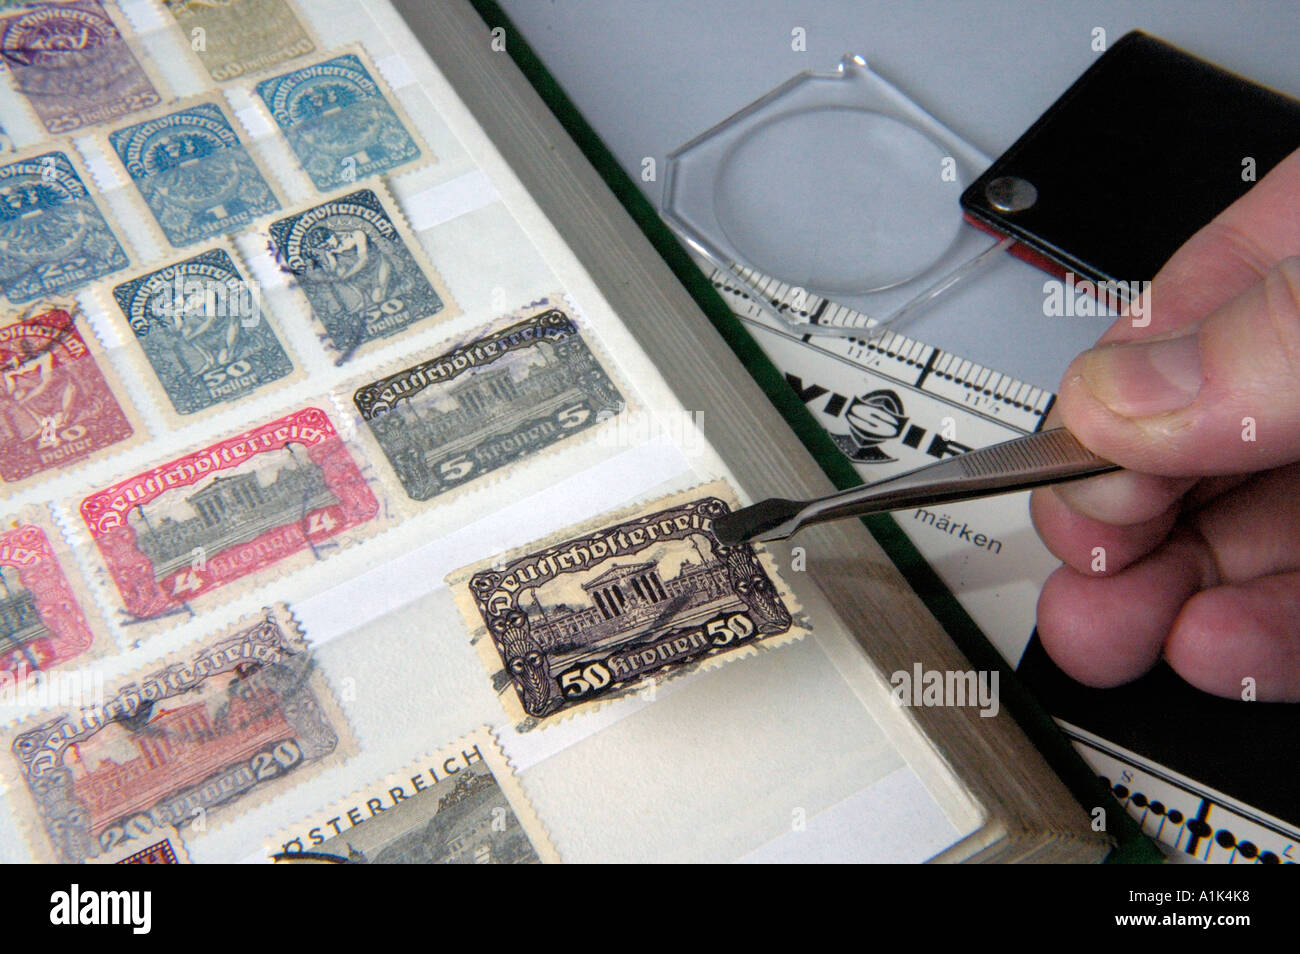 Stamp collection Stock Photo